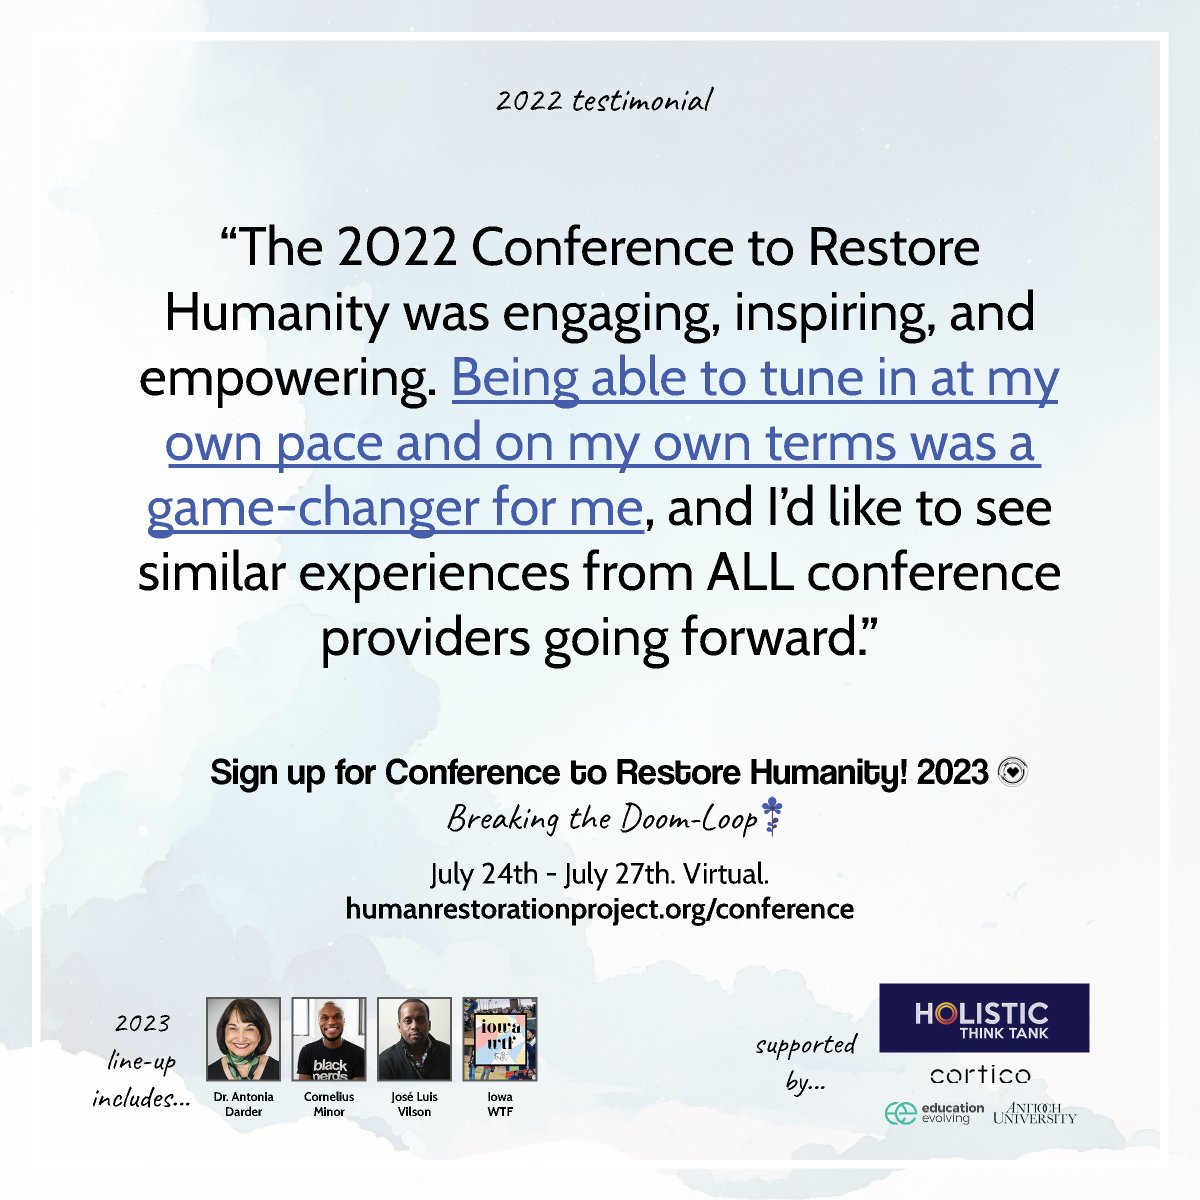 'The 2022 Conference to #RestoreHumanity was engaging, inspiring, and empowering. Being able to tune in at my own pace & on my own terms was a game-changer for me, & I'd like to see similar experiences from ALL conference providers...' 🔥 humanrestorationproject.org/conference #sschat #STEM